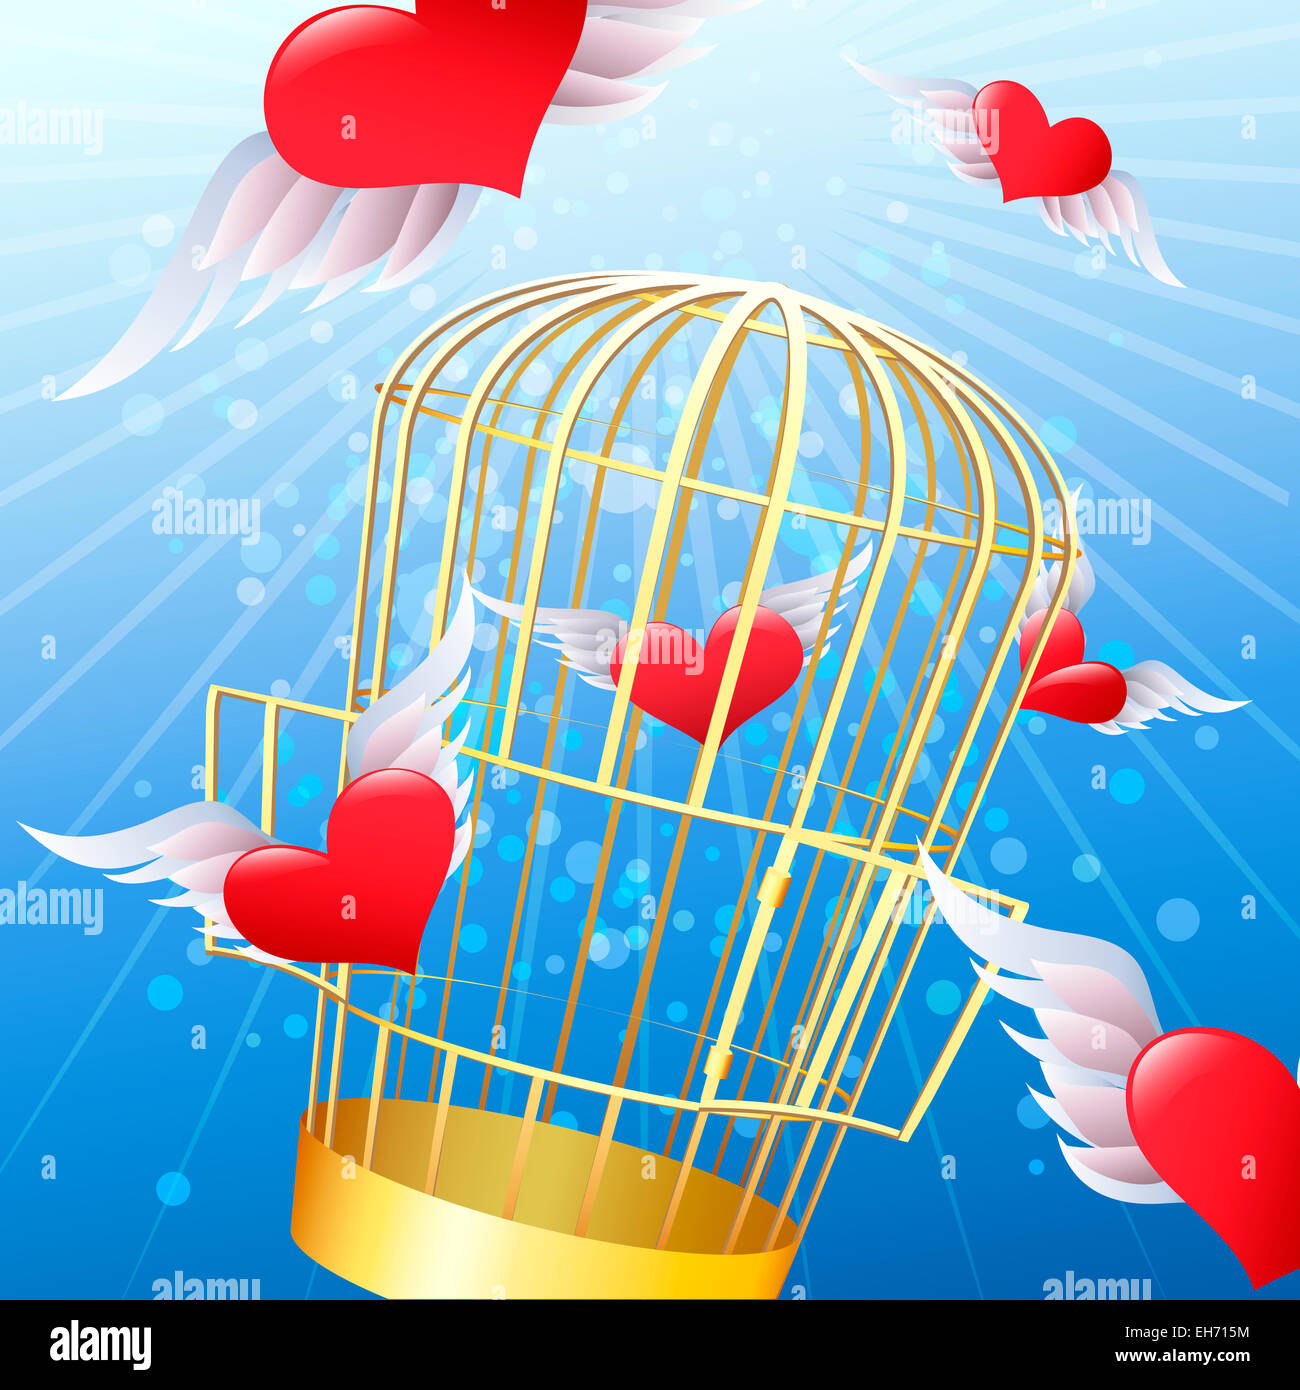 Illustration with released hearts flies away from a golden cage drawn in cartoon style Stock Photo